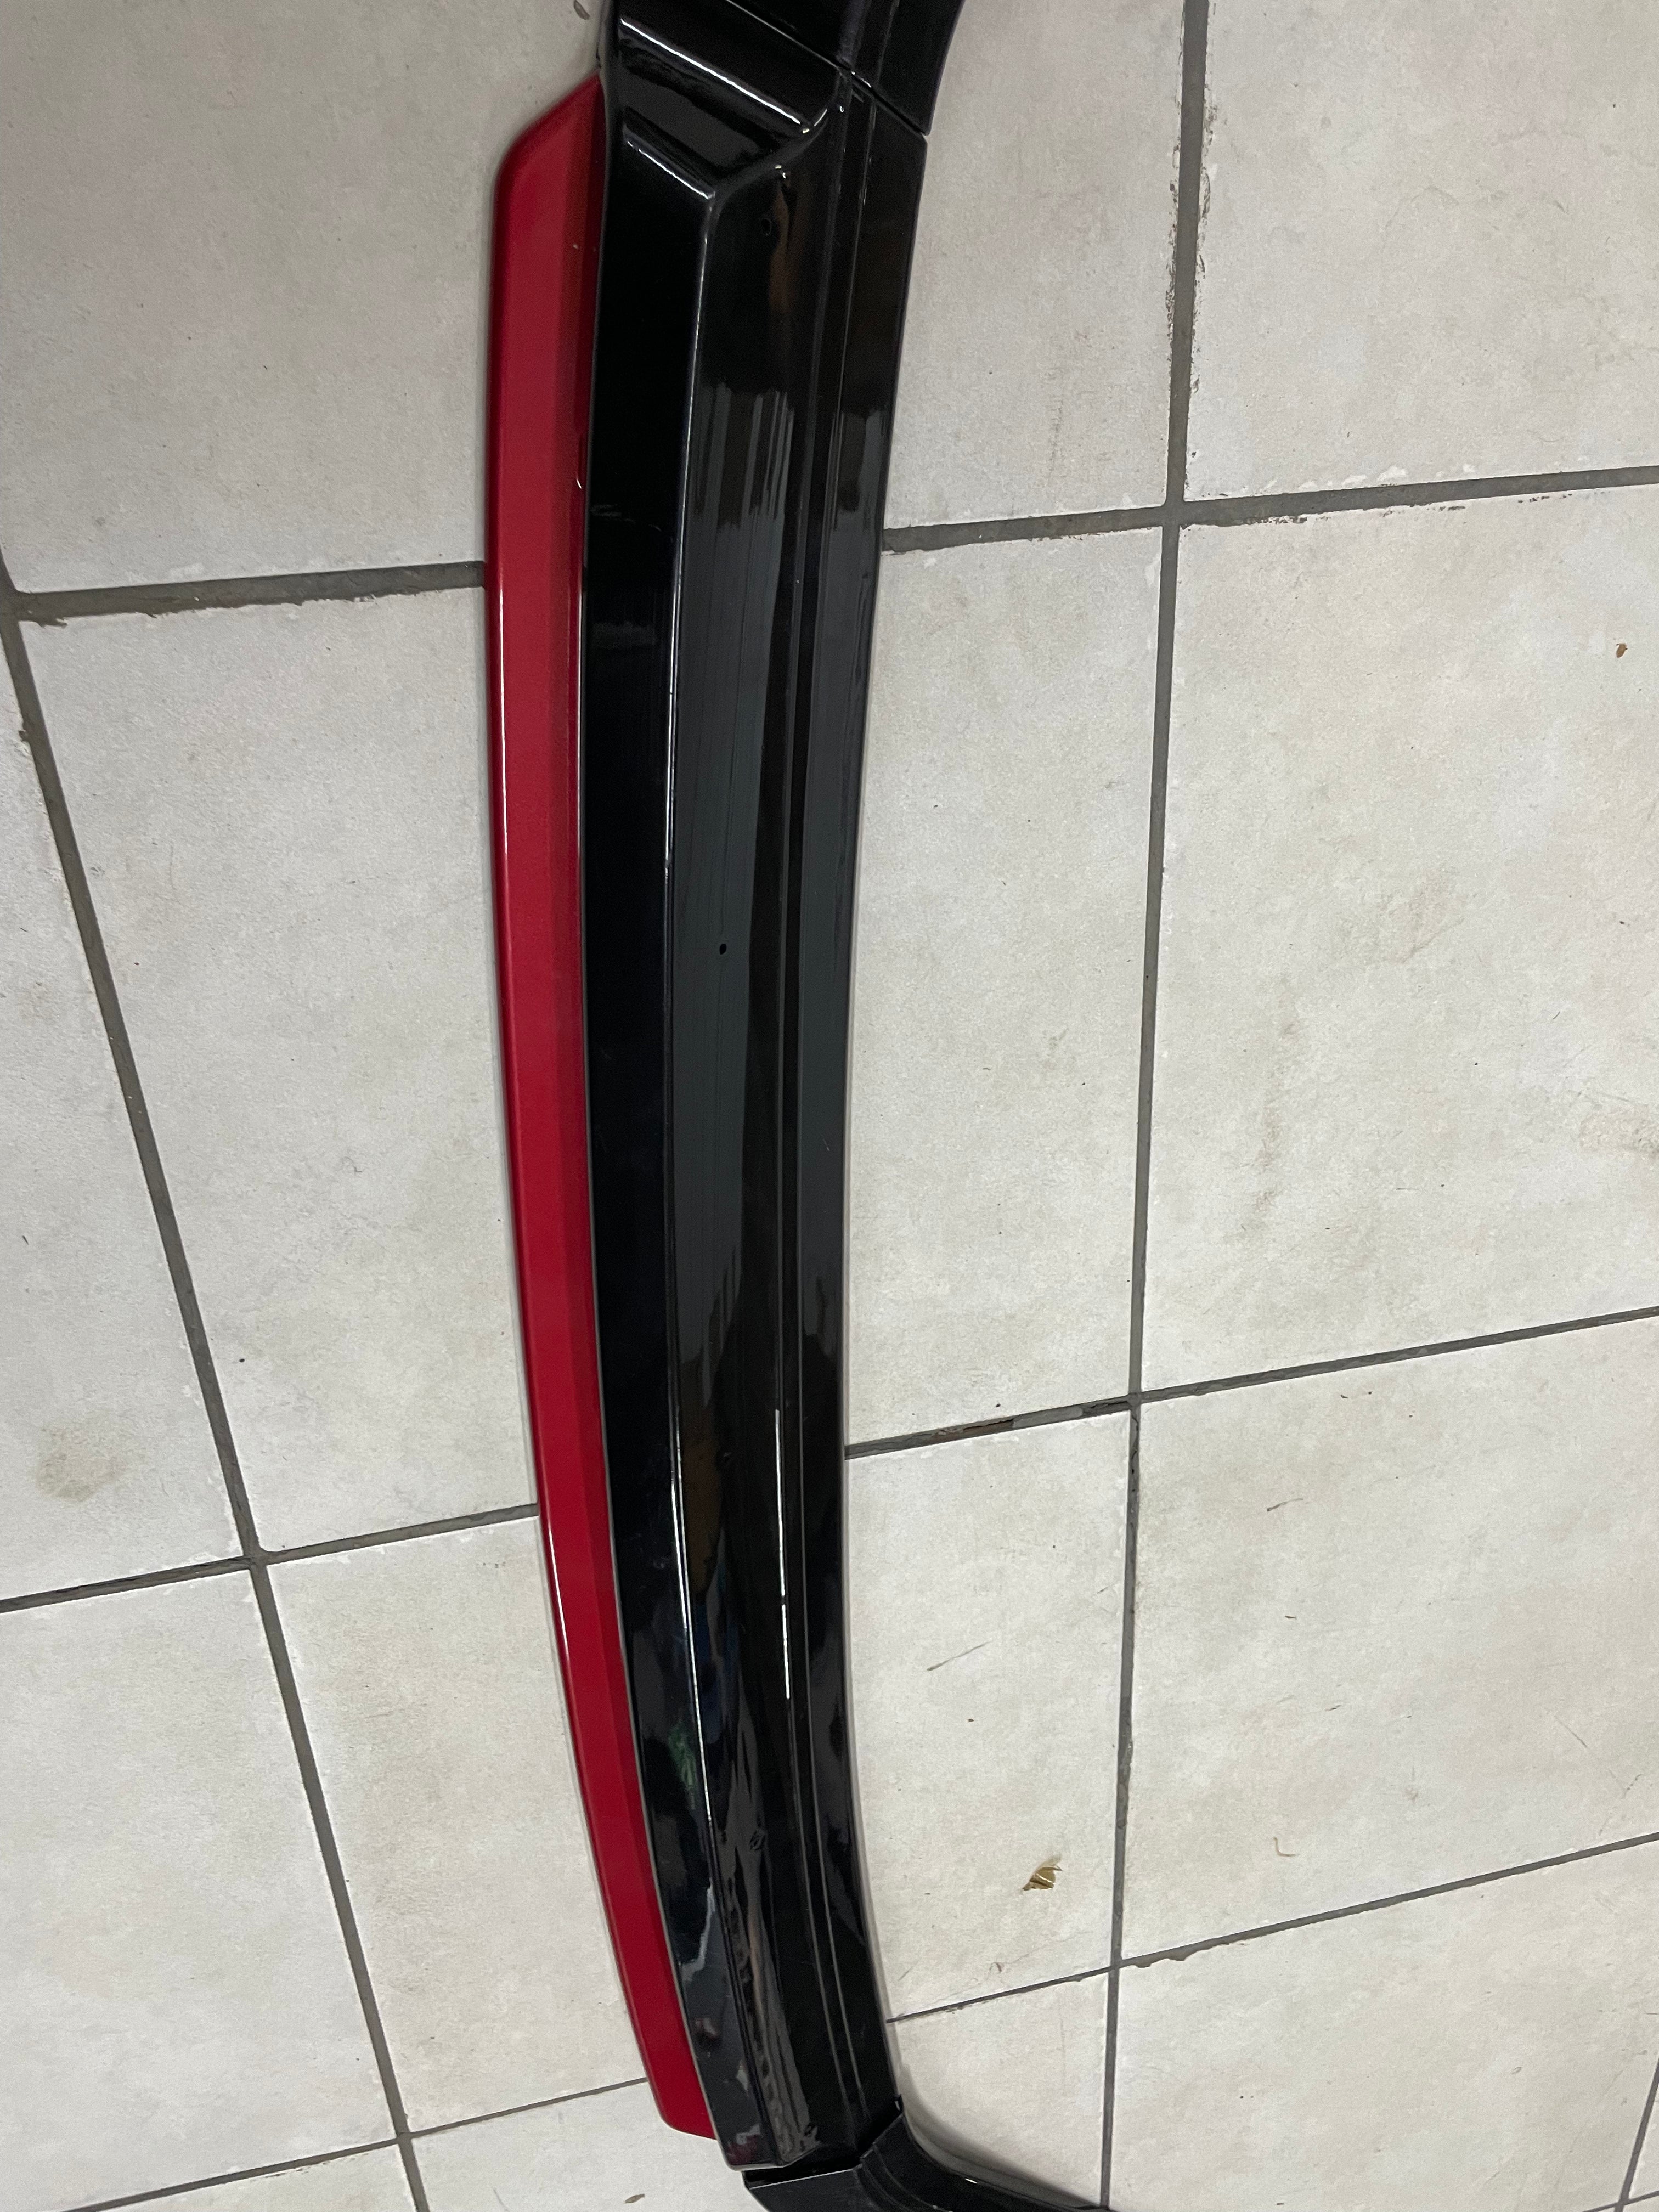 Suitable for Mk7 4pce front spoiler      plastic   gloss black  diy fitment    Non oe   fits all Mk7 models incl GTI & R